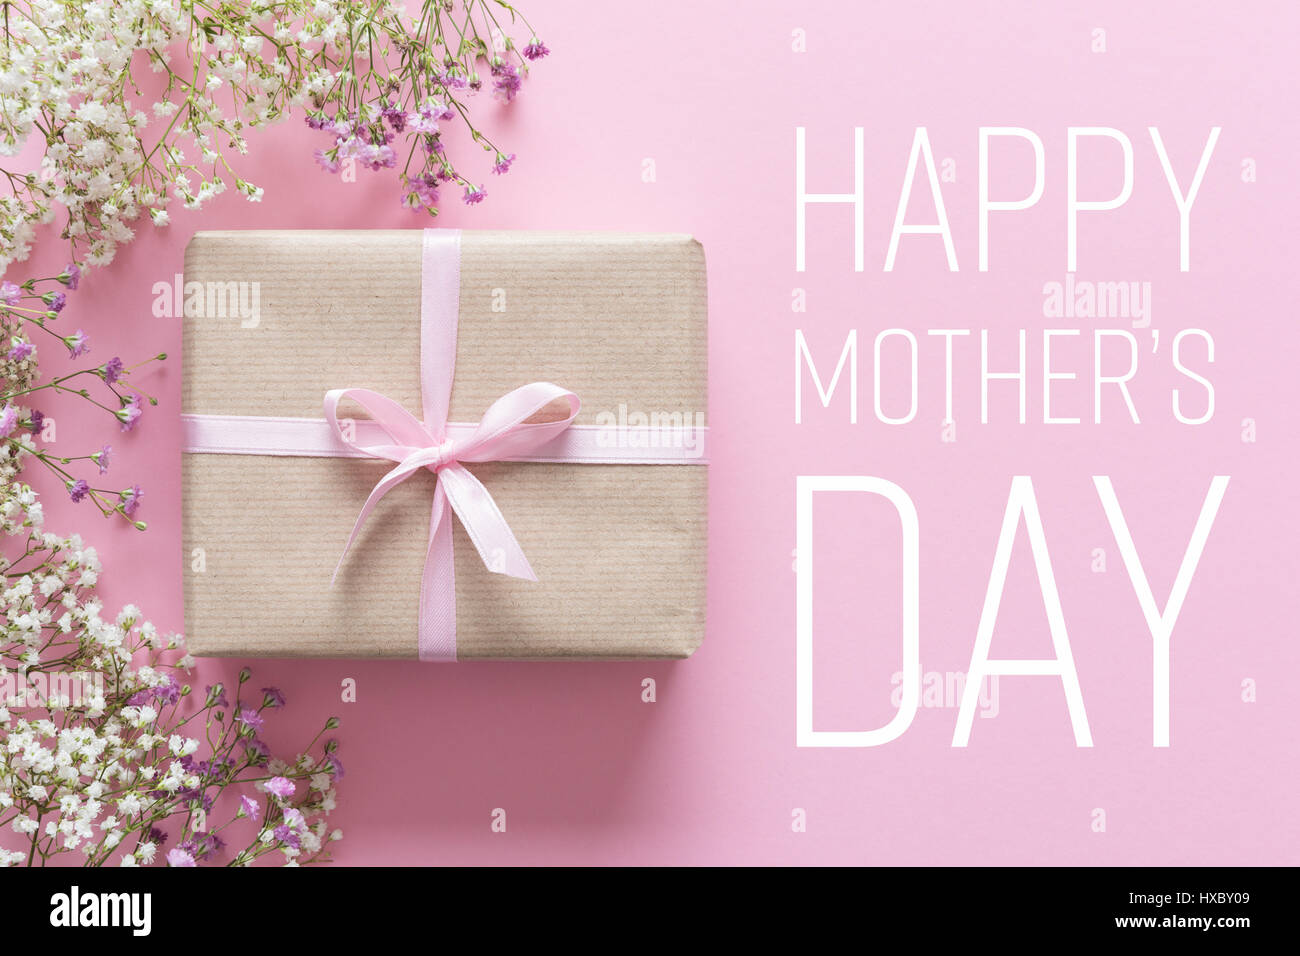 Mother's day card, pink background with white flowers and a present Stock Photo